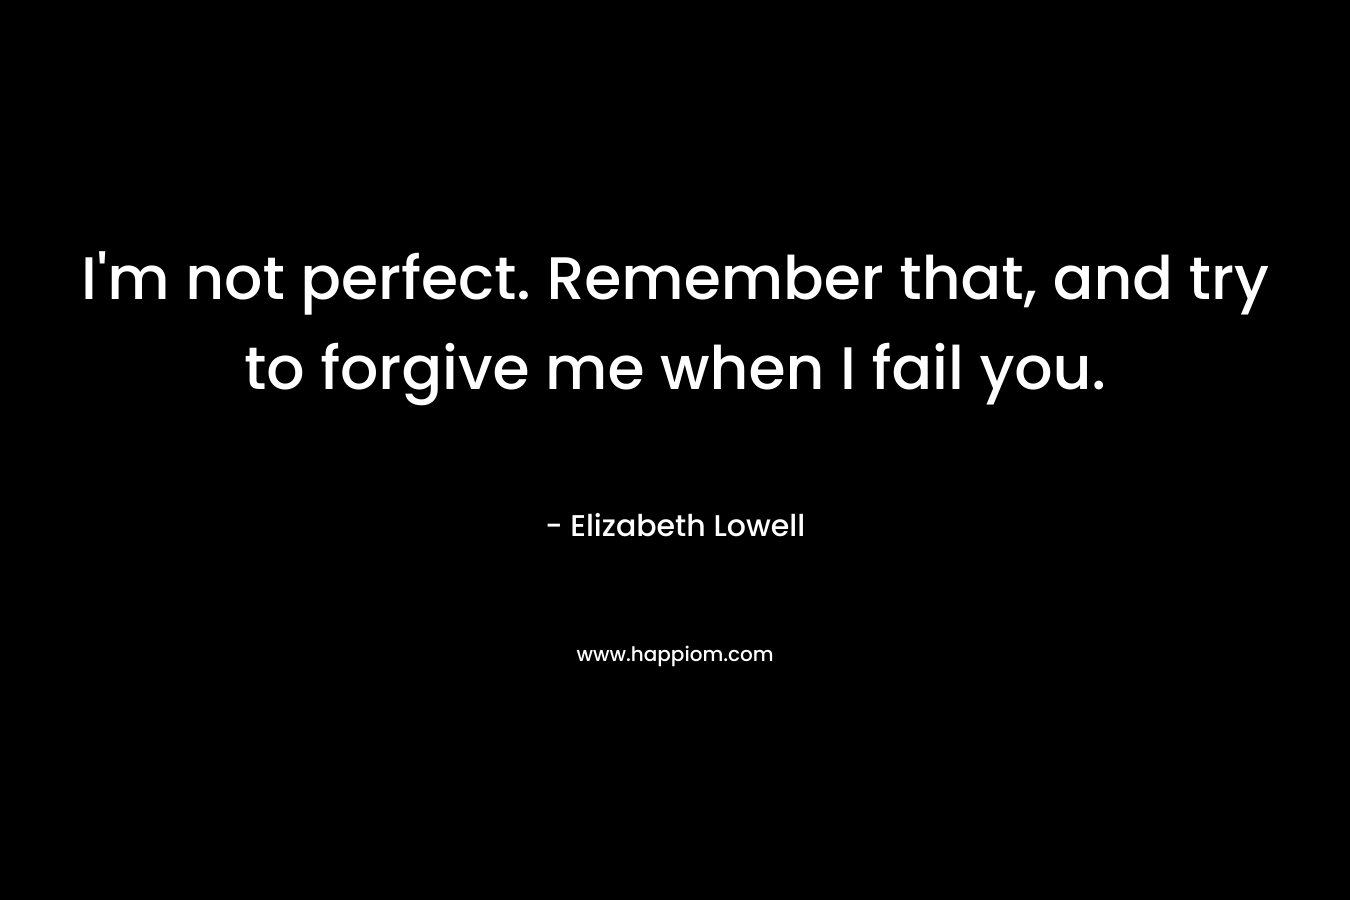 I'm not perfect. Remember that, and try to forgive me when I fail you.